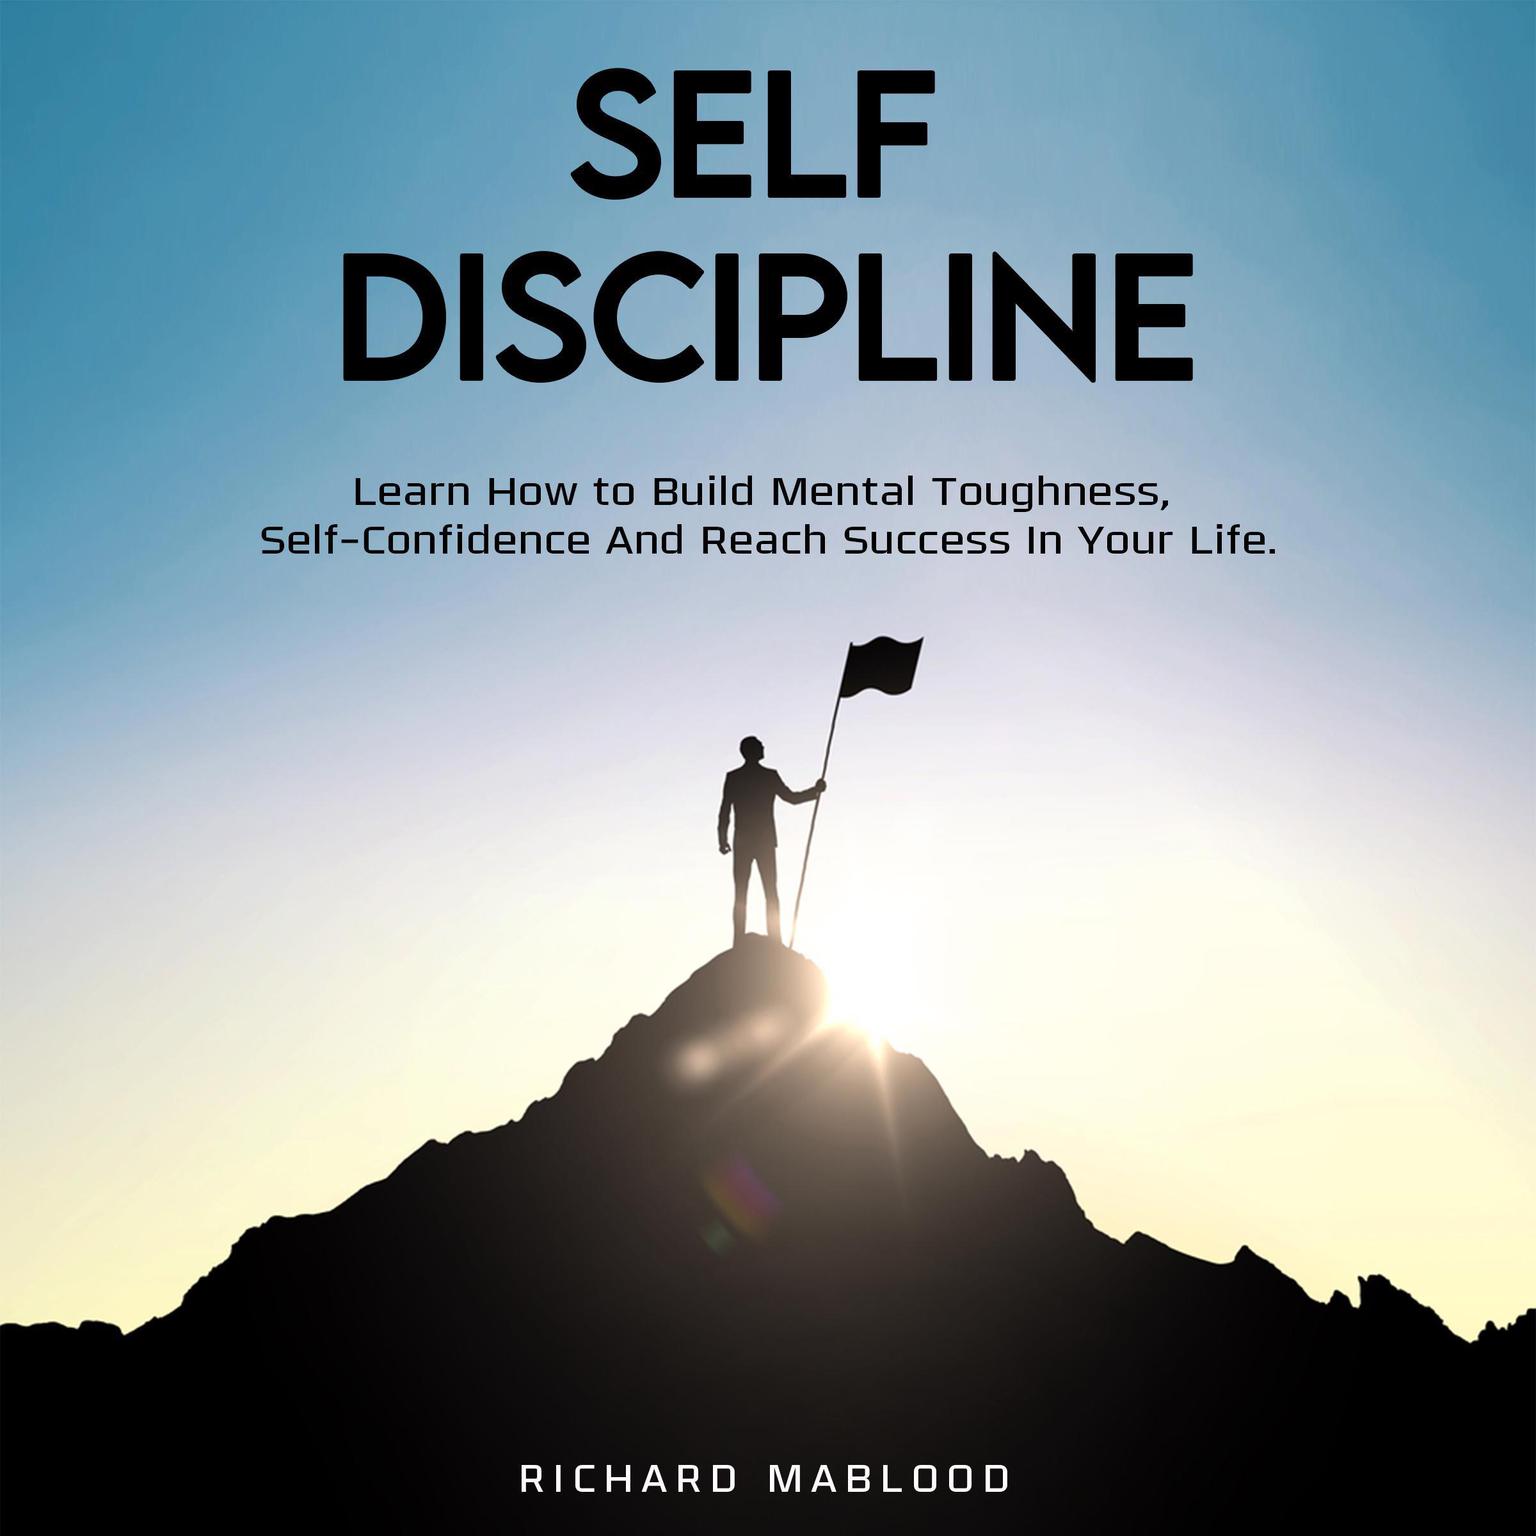 Self Discipline: Learn How to Build Mental Toughness, Self-Confidence, and Reach Success in Your Life Audiobook, by Richard Mablood